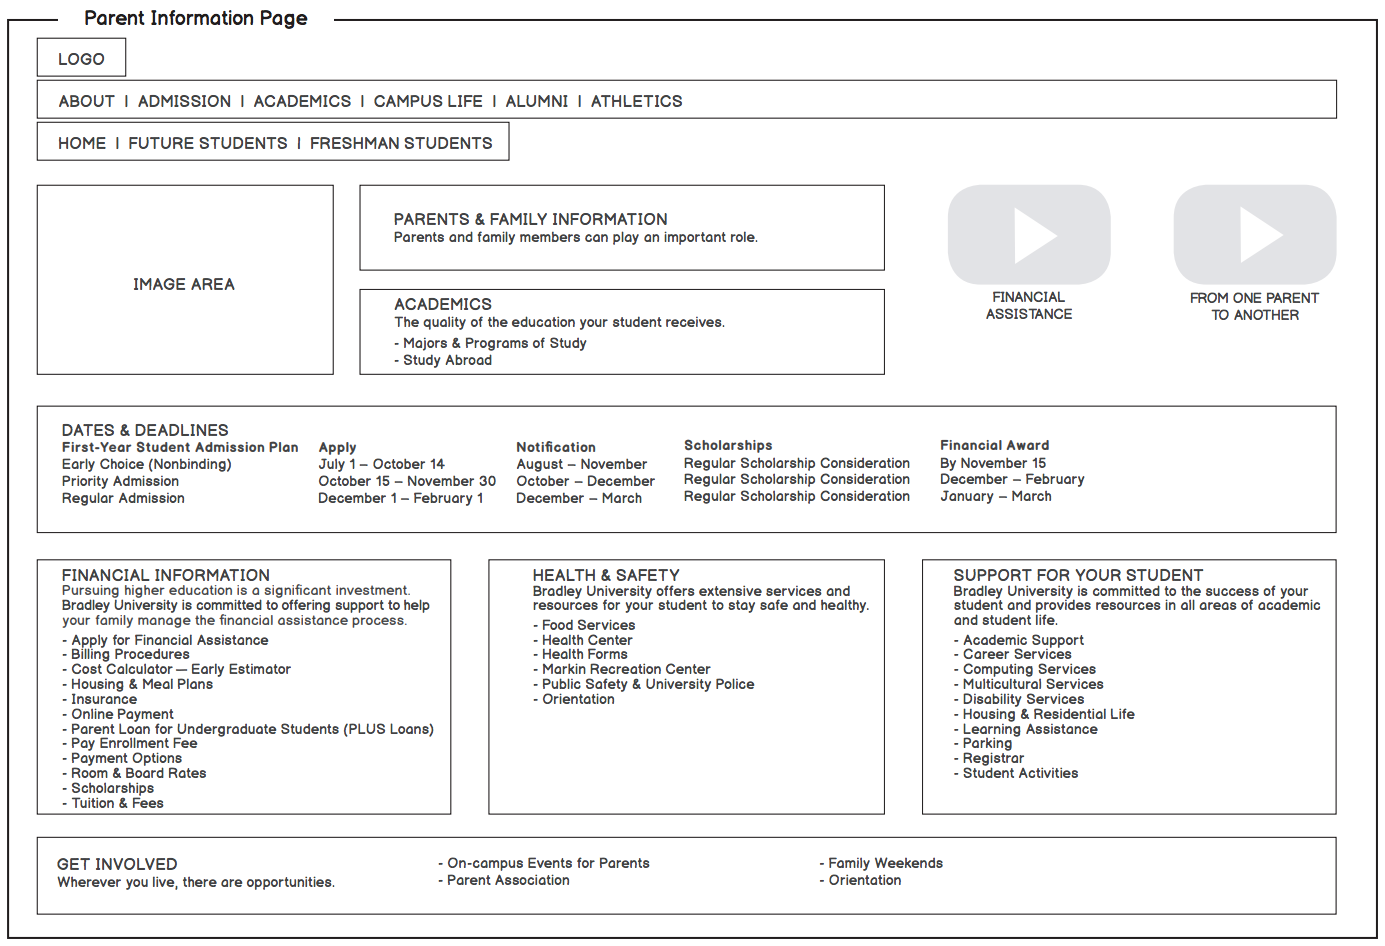 example wireframe for parents information on university website